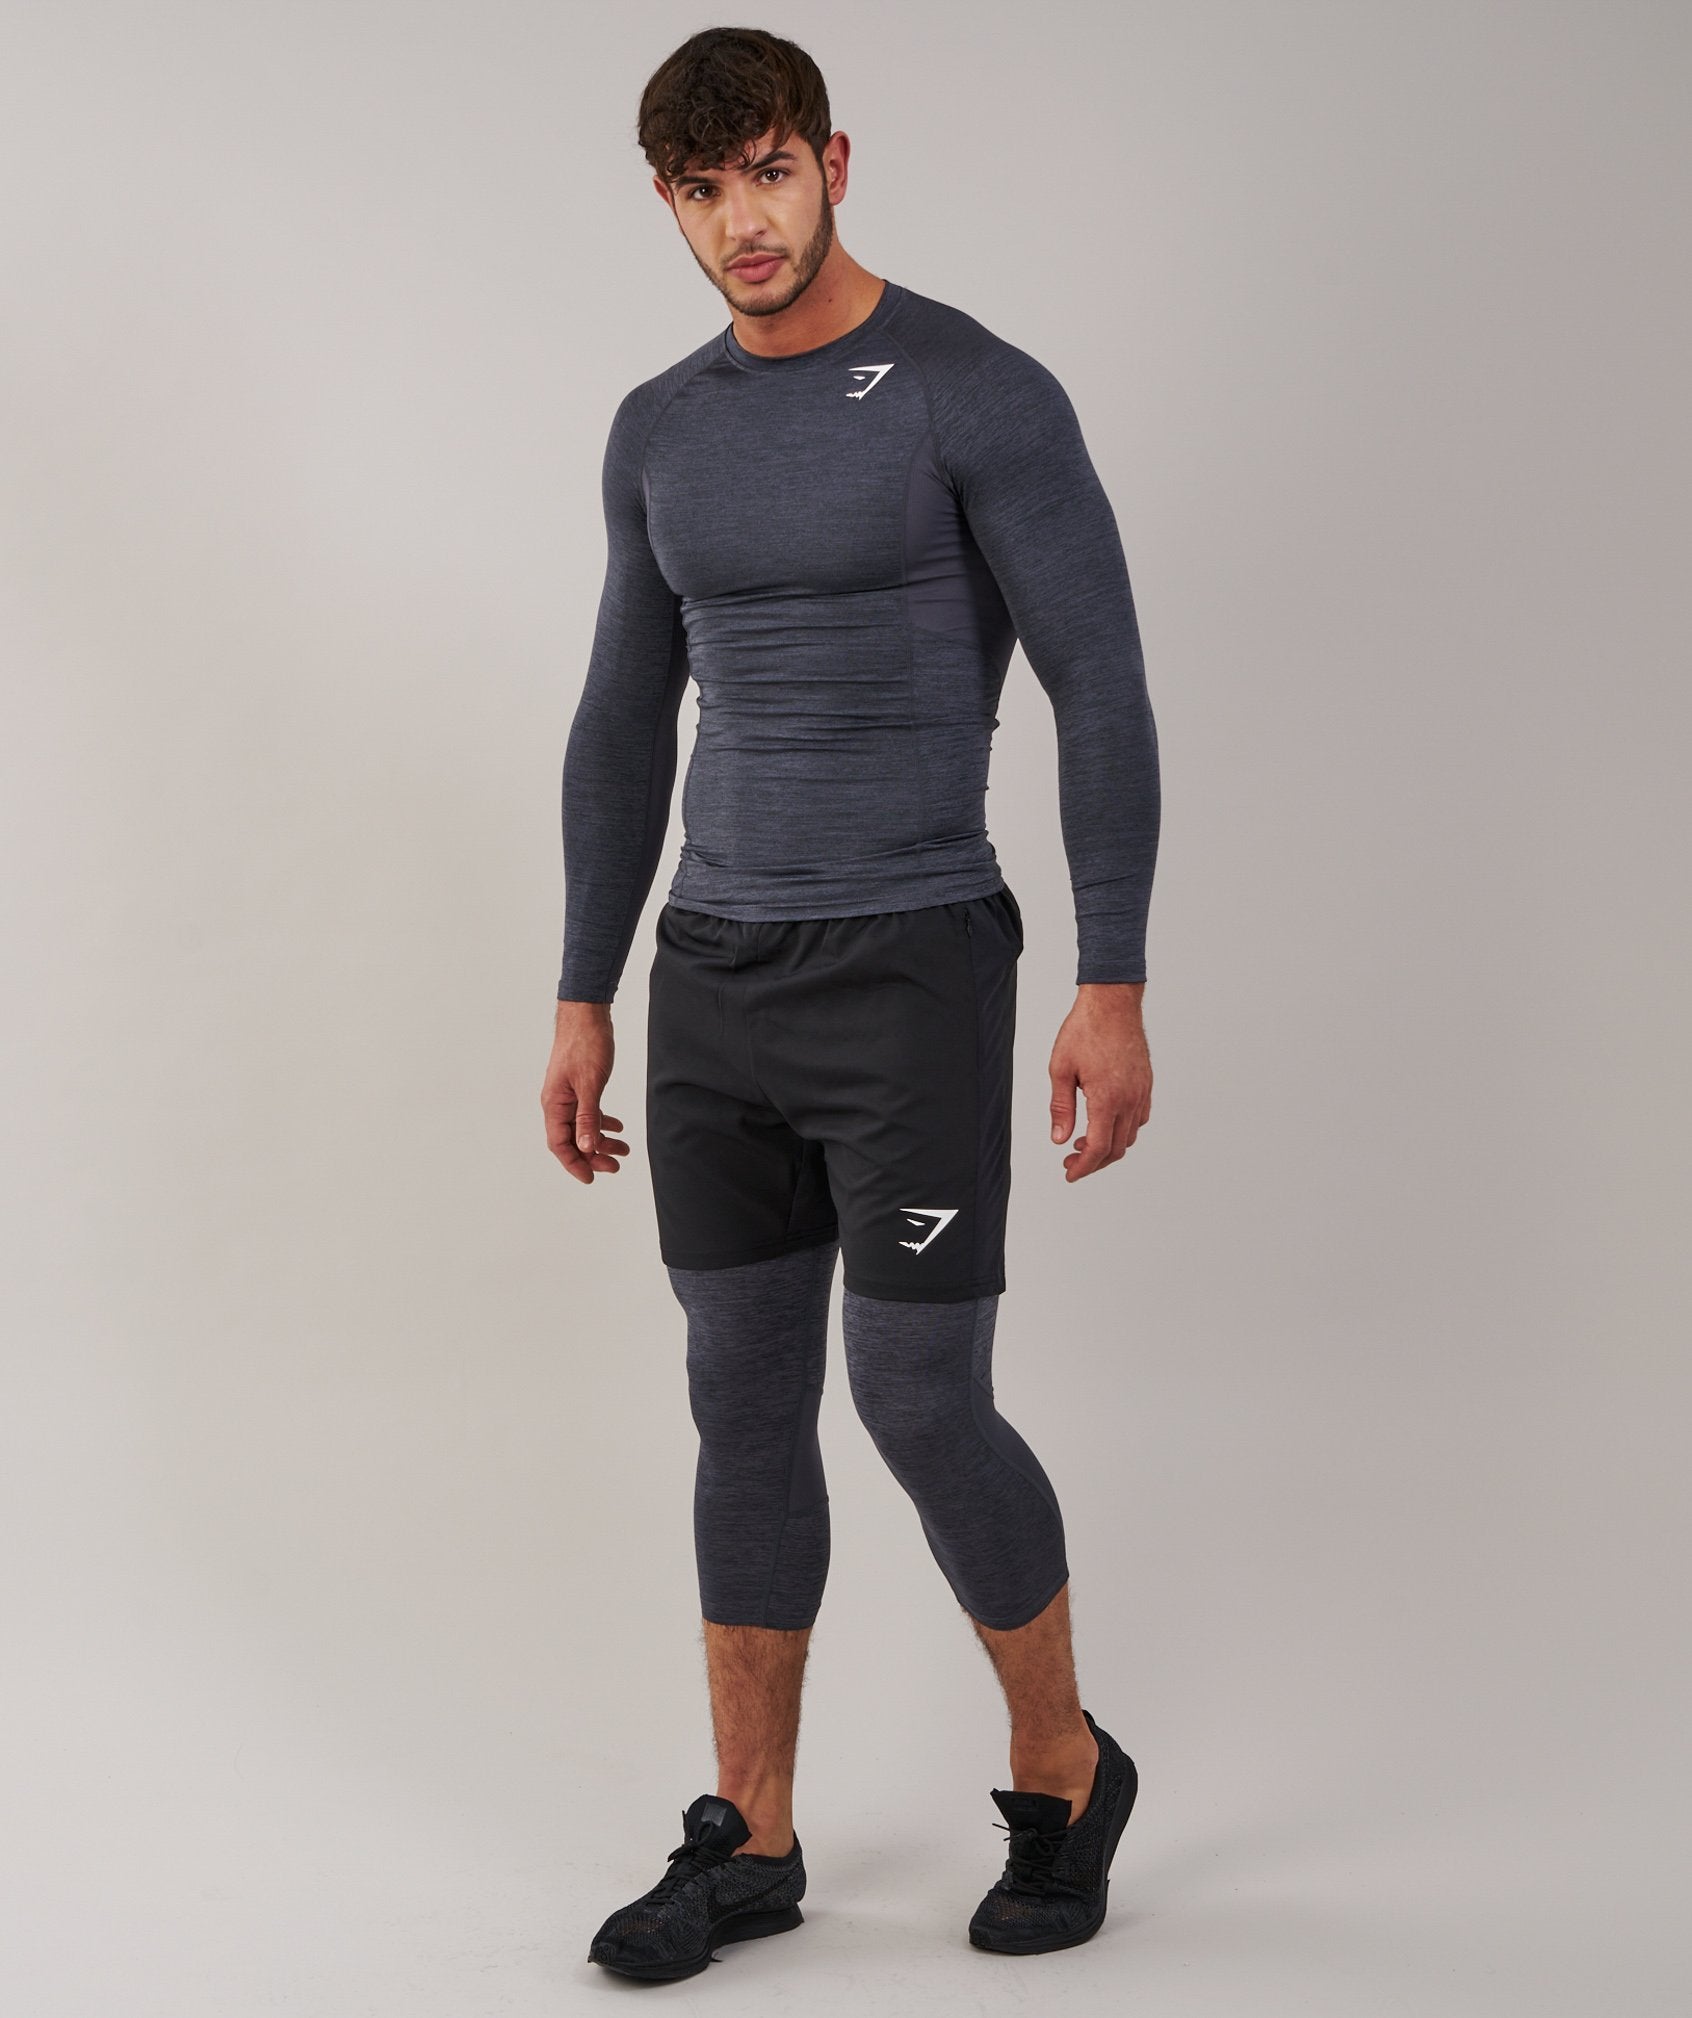 Element Baselayer 3/4 Legging in Charcoal Marl - view 1